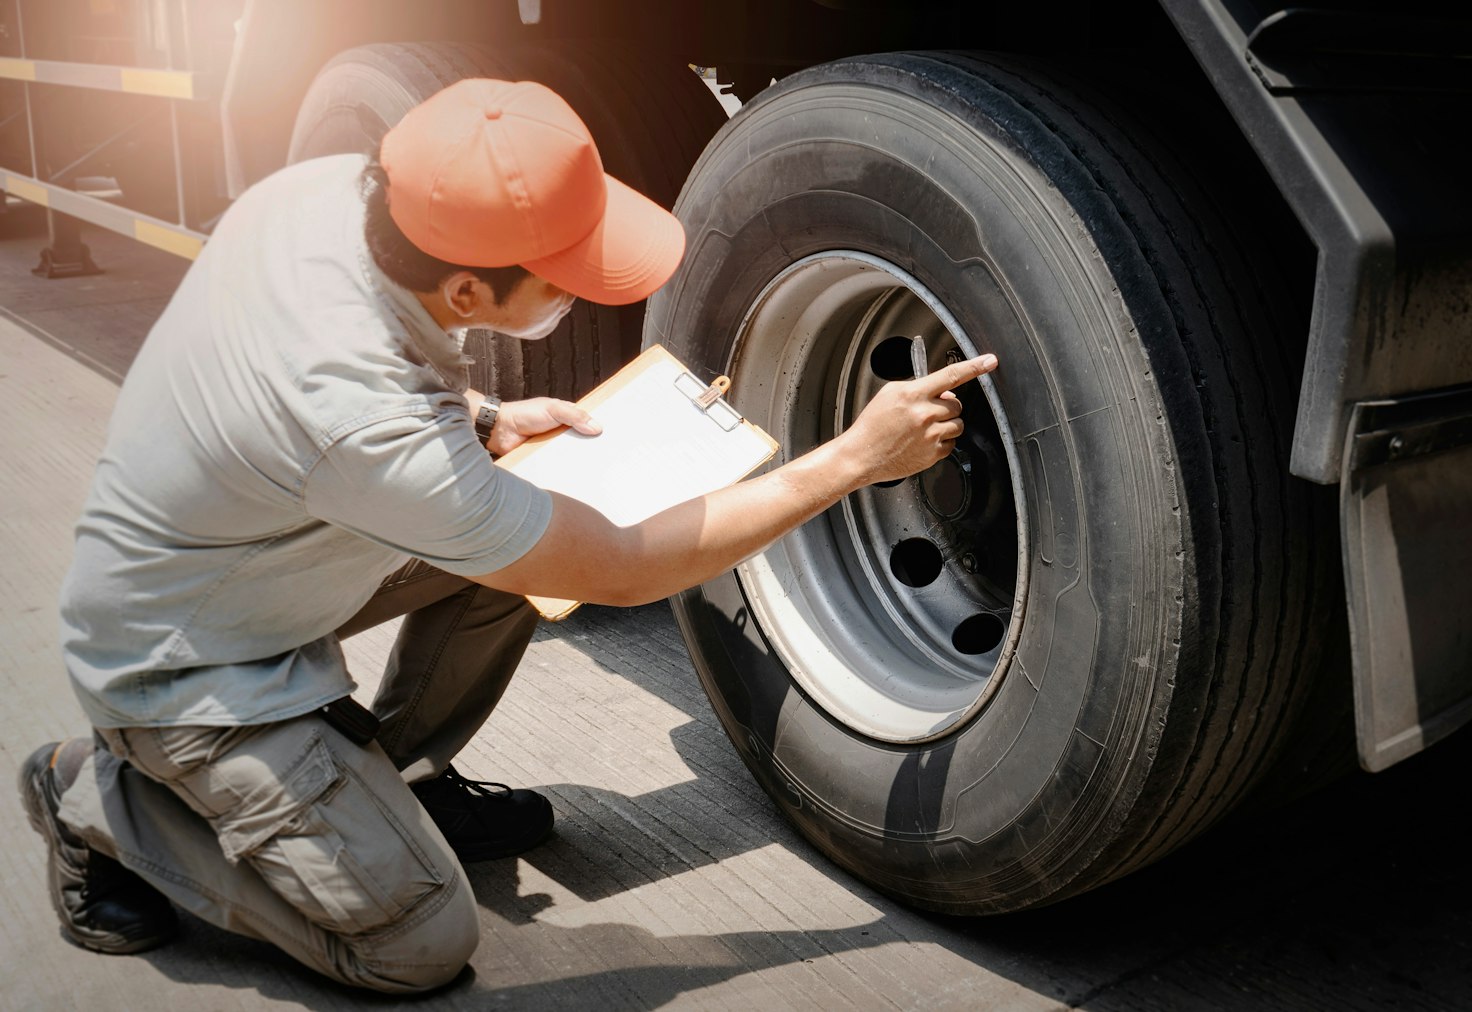 How to Ensure Safe Travels: Pre-Road Checklist for Truck Drivers